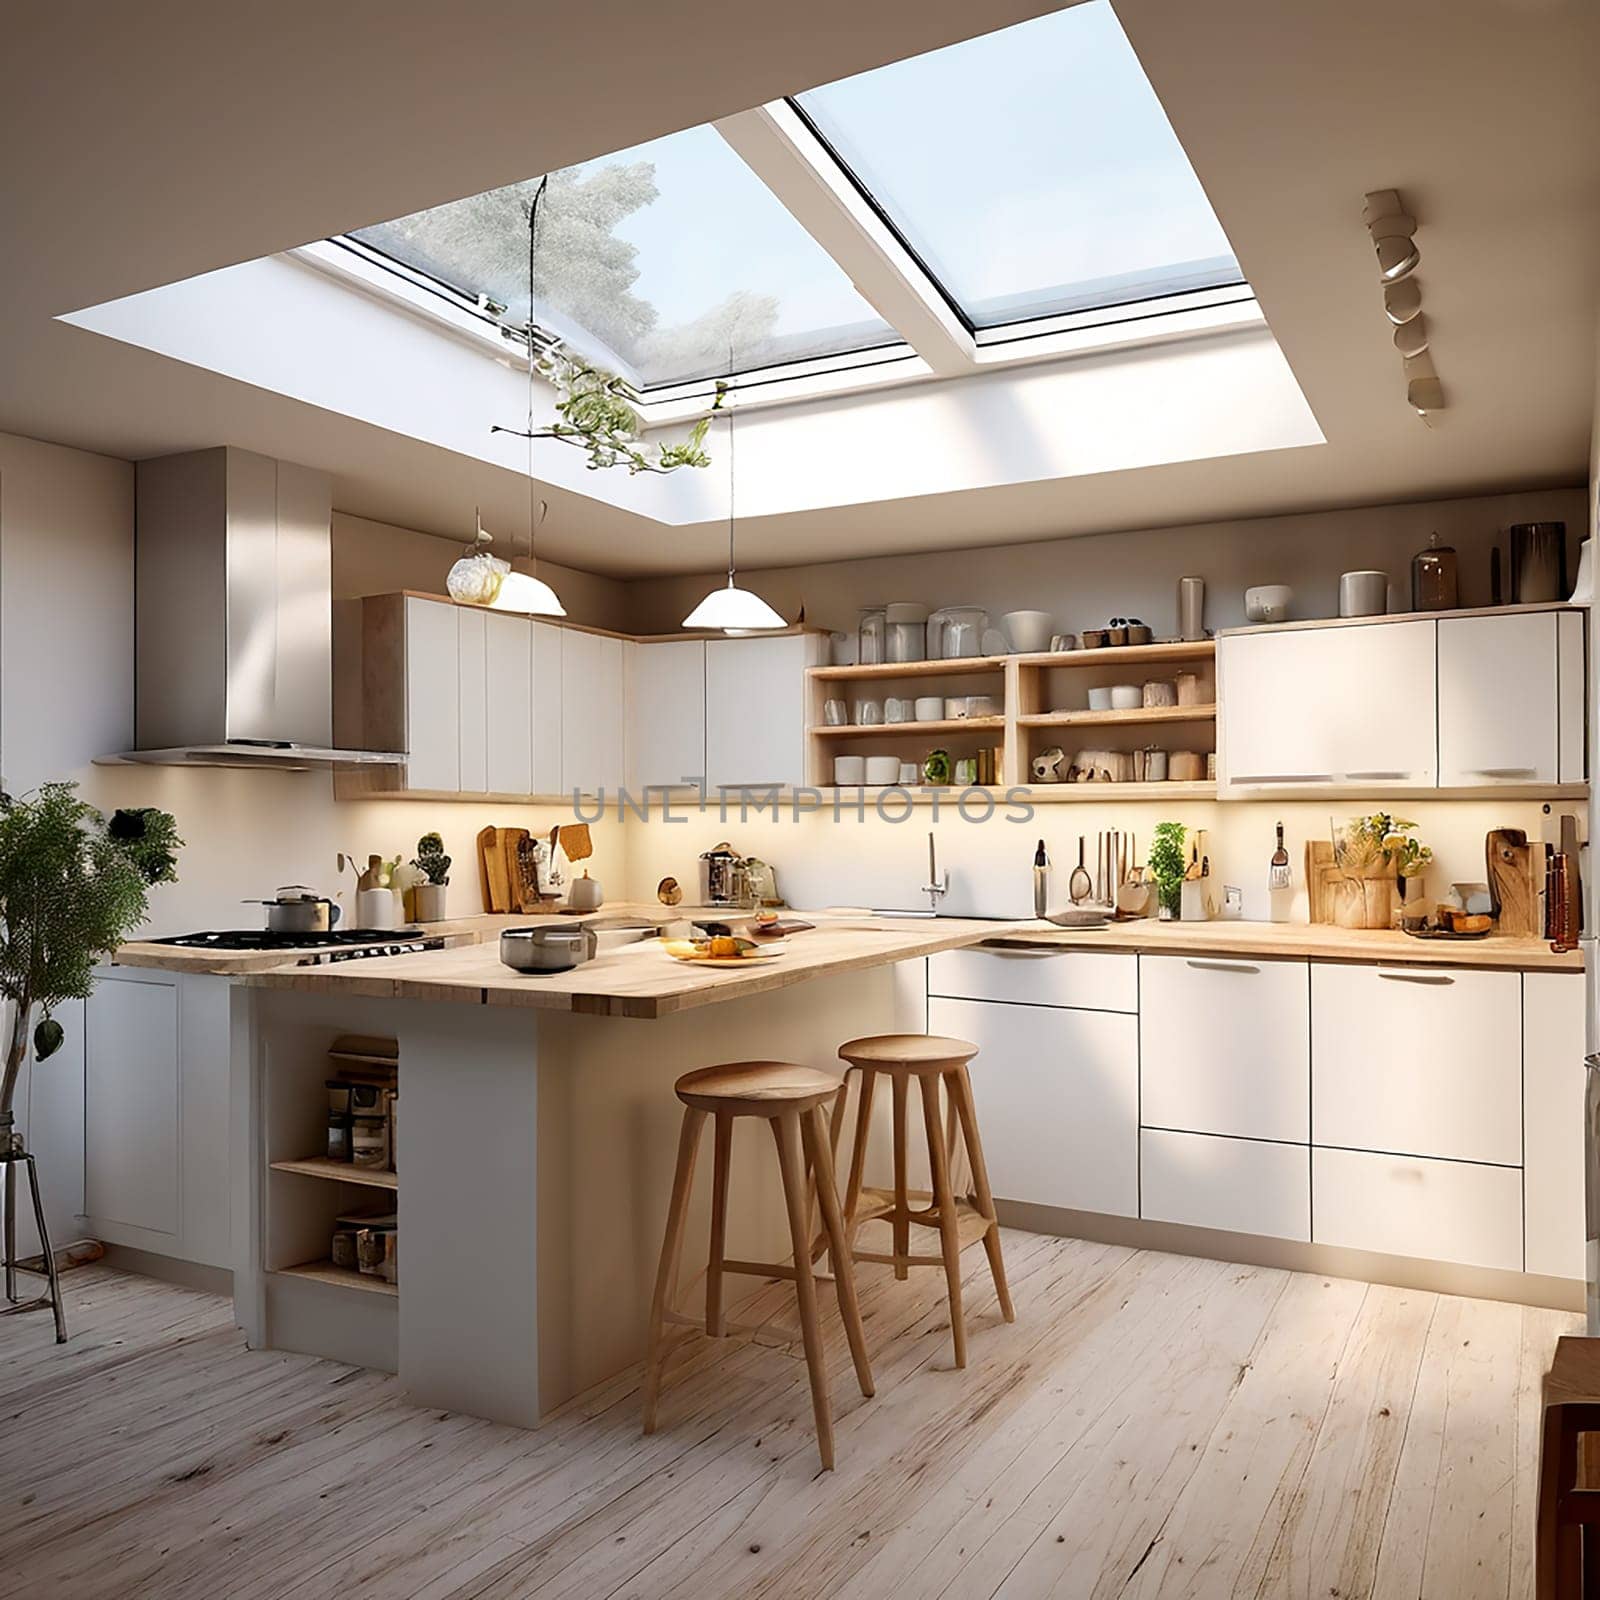 A Kitchen with a View: Designing a Culinary Space that Embraces the Outdoors by Petrichor